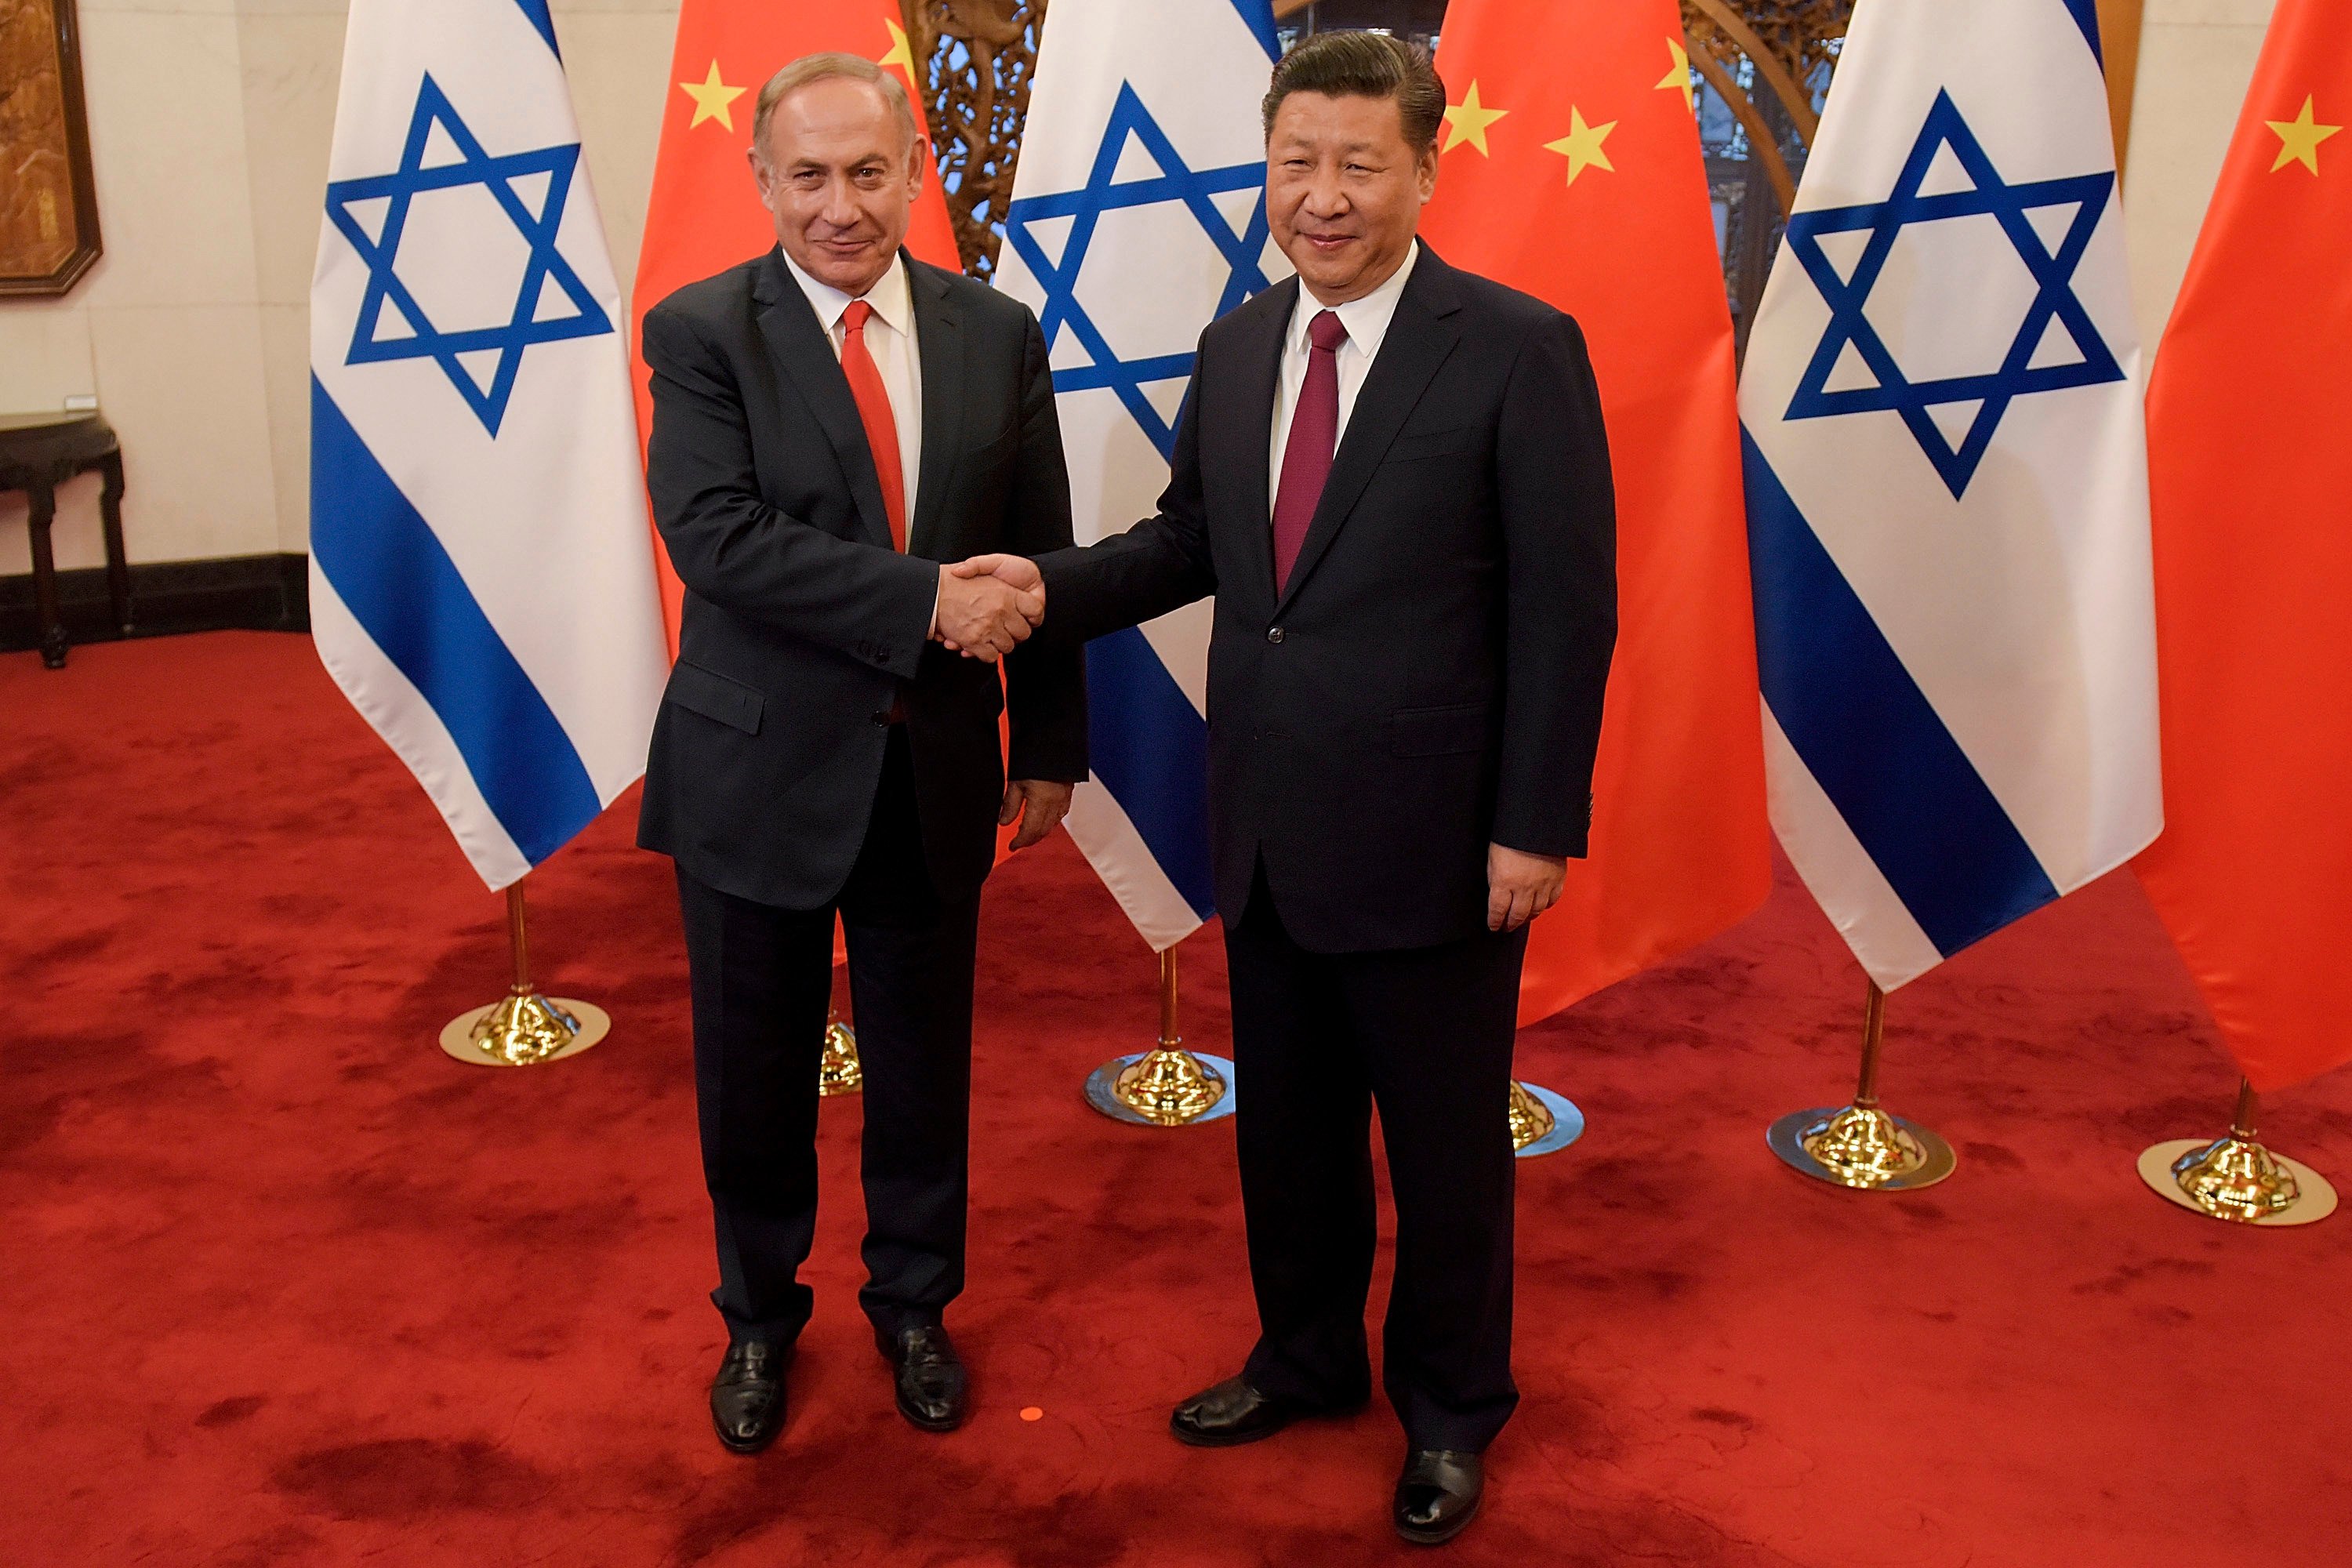 Israeli Prime Minister Benjamin Netanyahu (left), shown here with Chinese President Xi Jinping in 2017, once called his country’s ties with Beijing a “marriage made in heaven”. Photo: AP